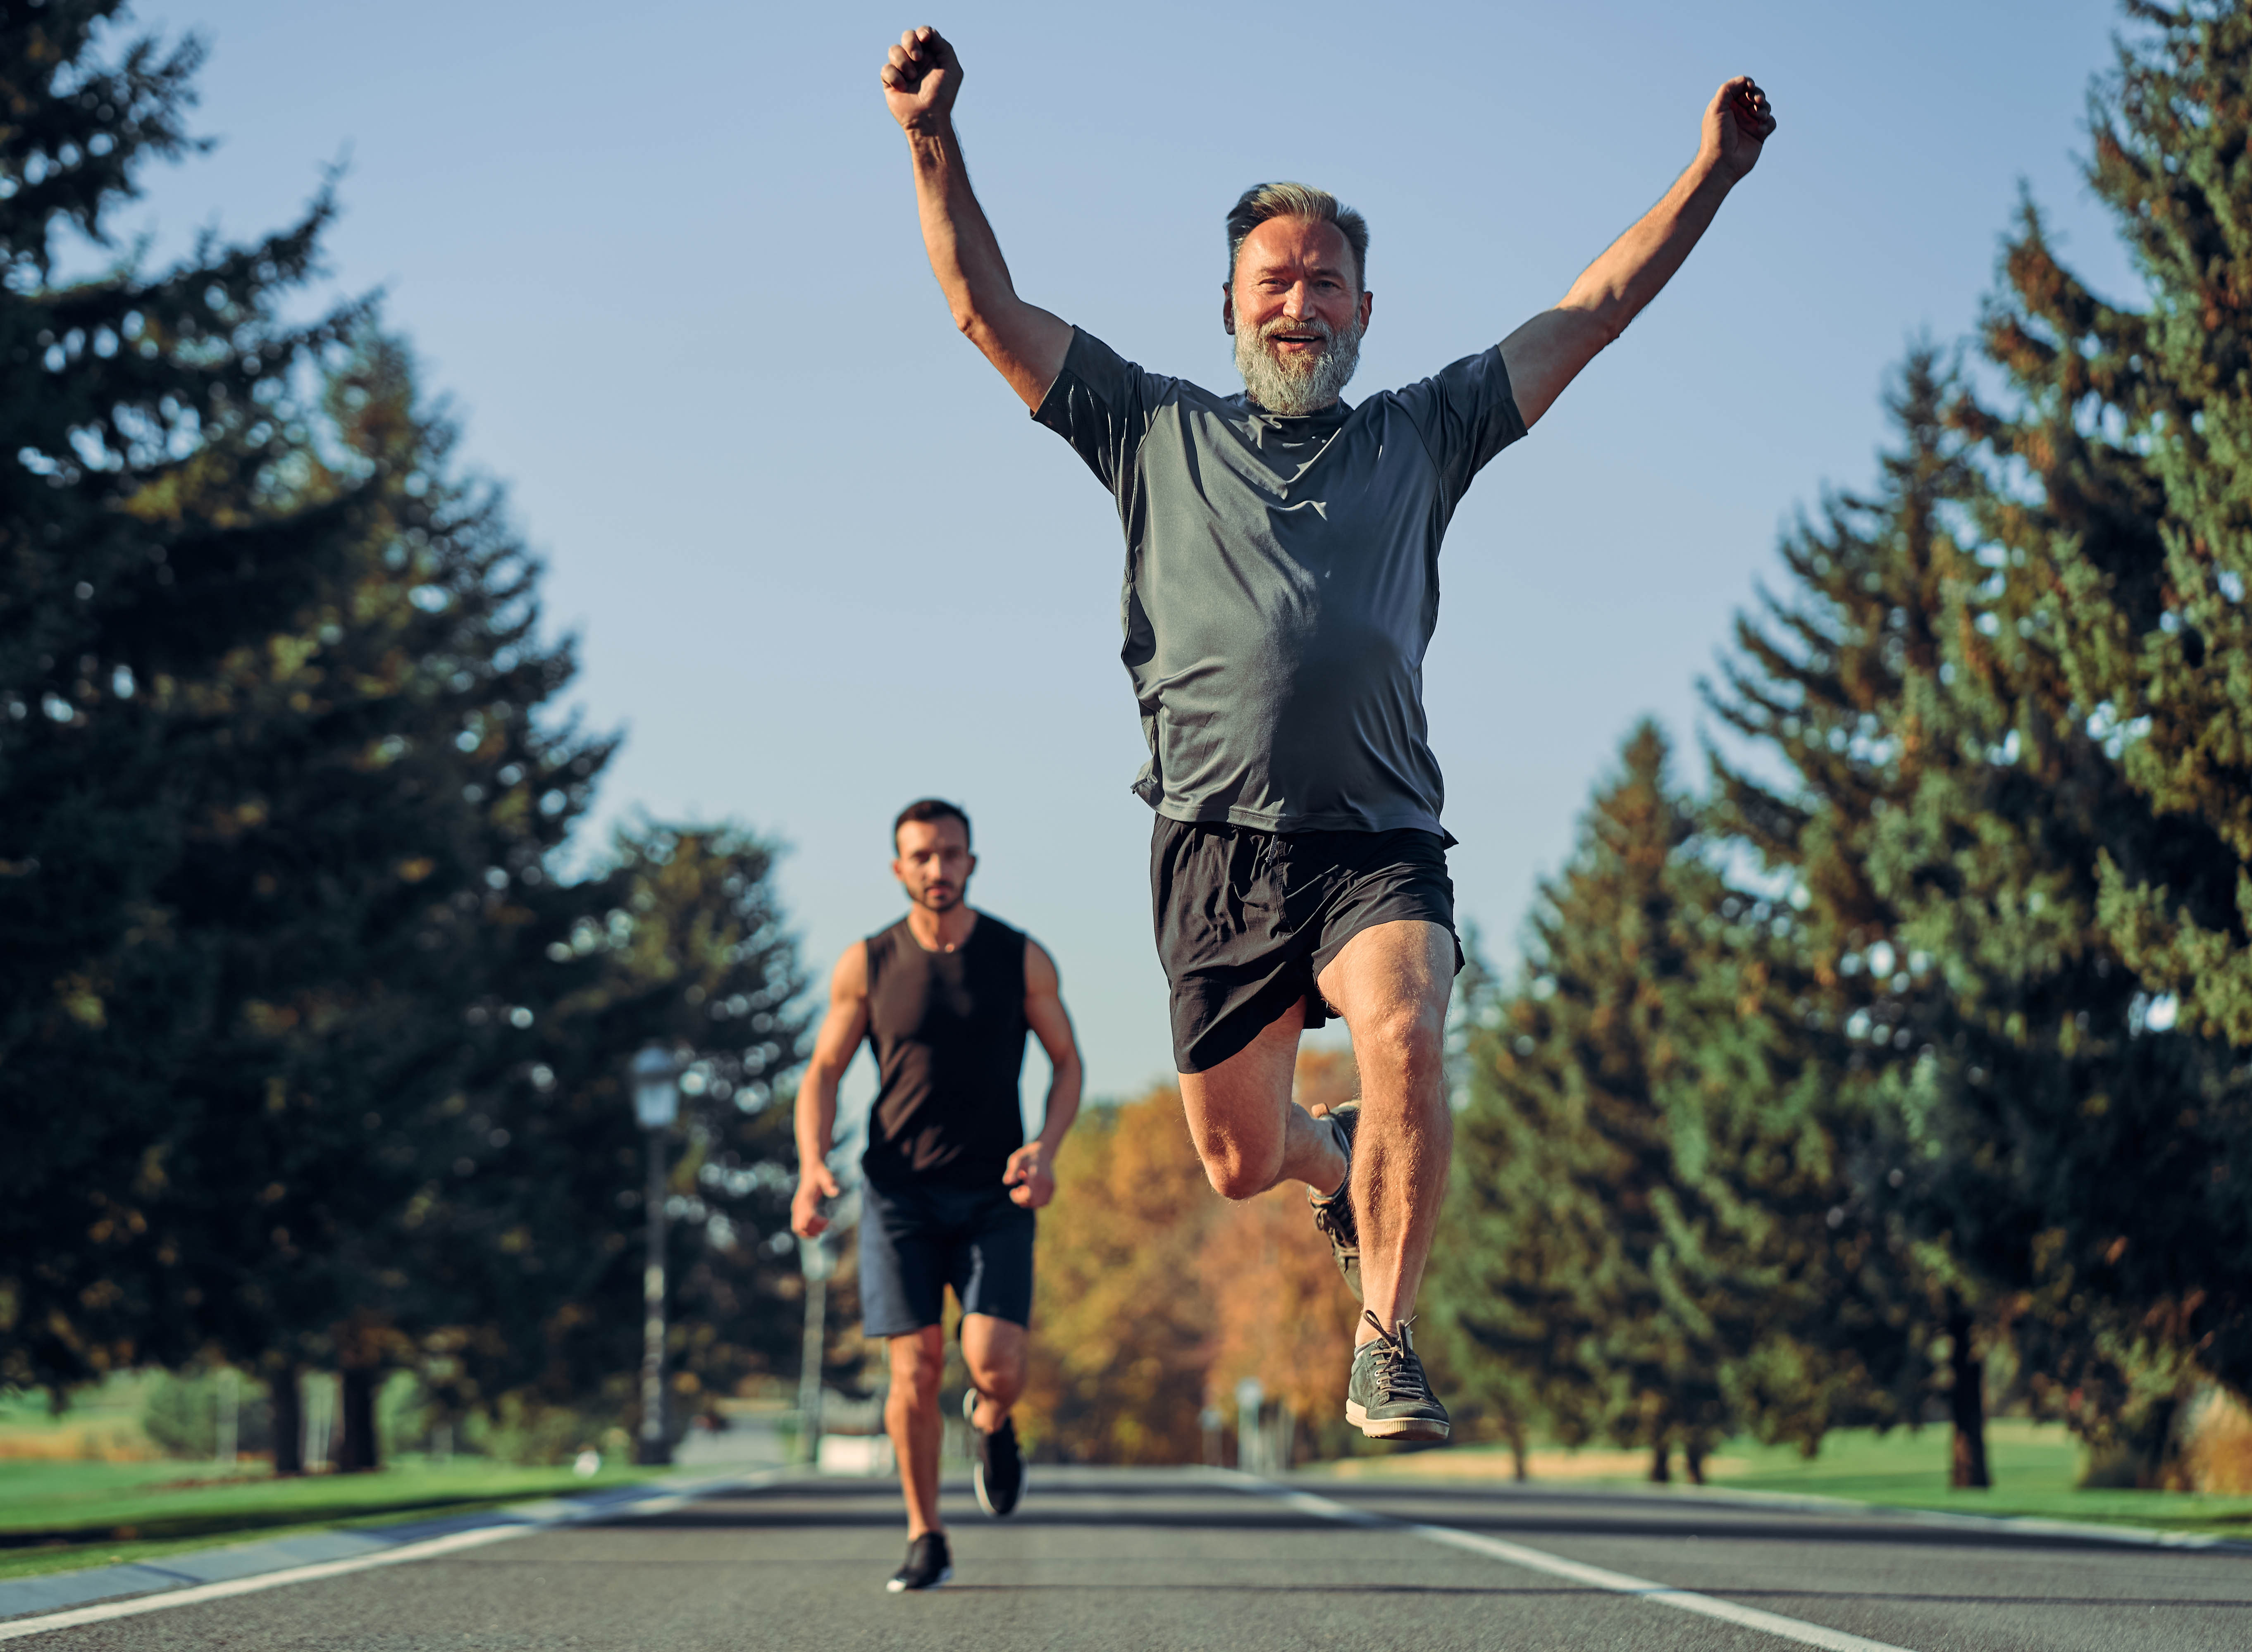 Older man crossing the finish line in a park with his arms raised and jumping into the air. Another, younger man is in the background running towards the older man.